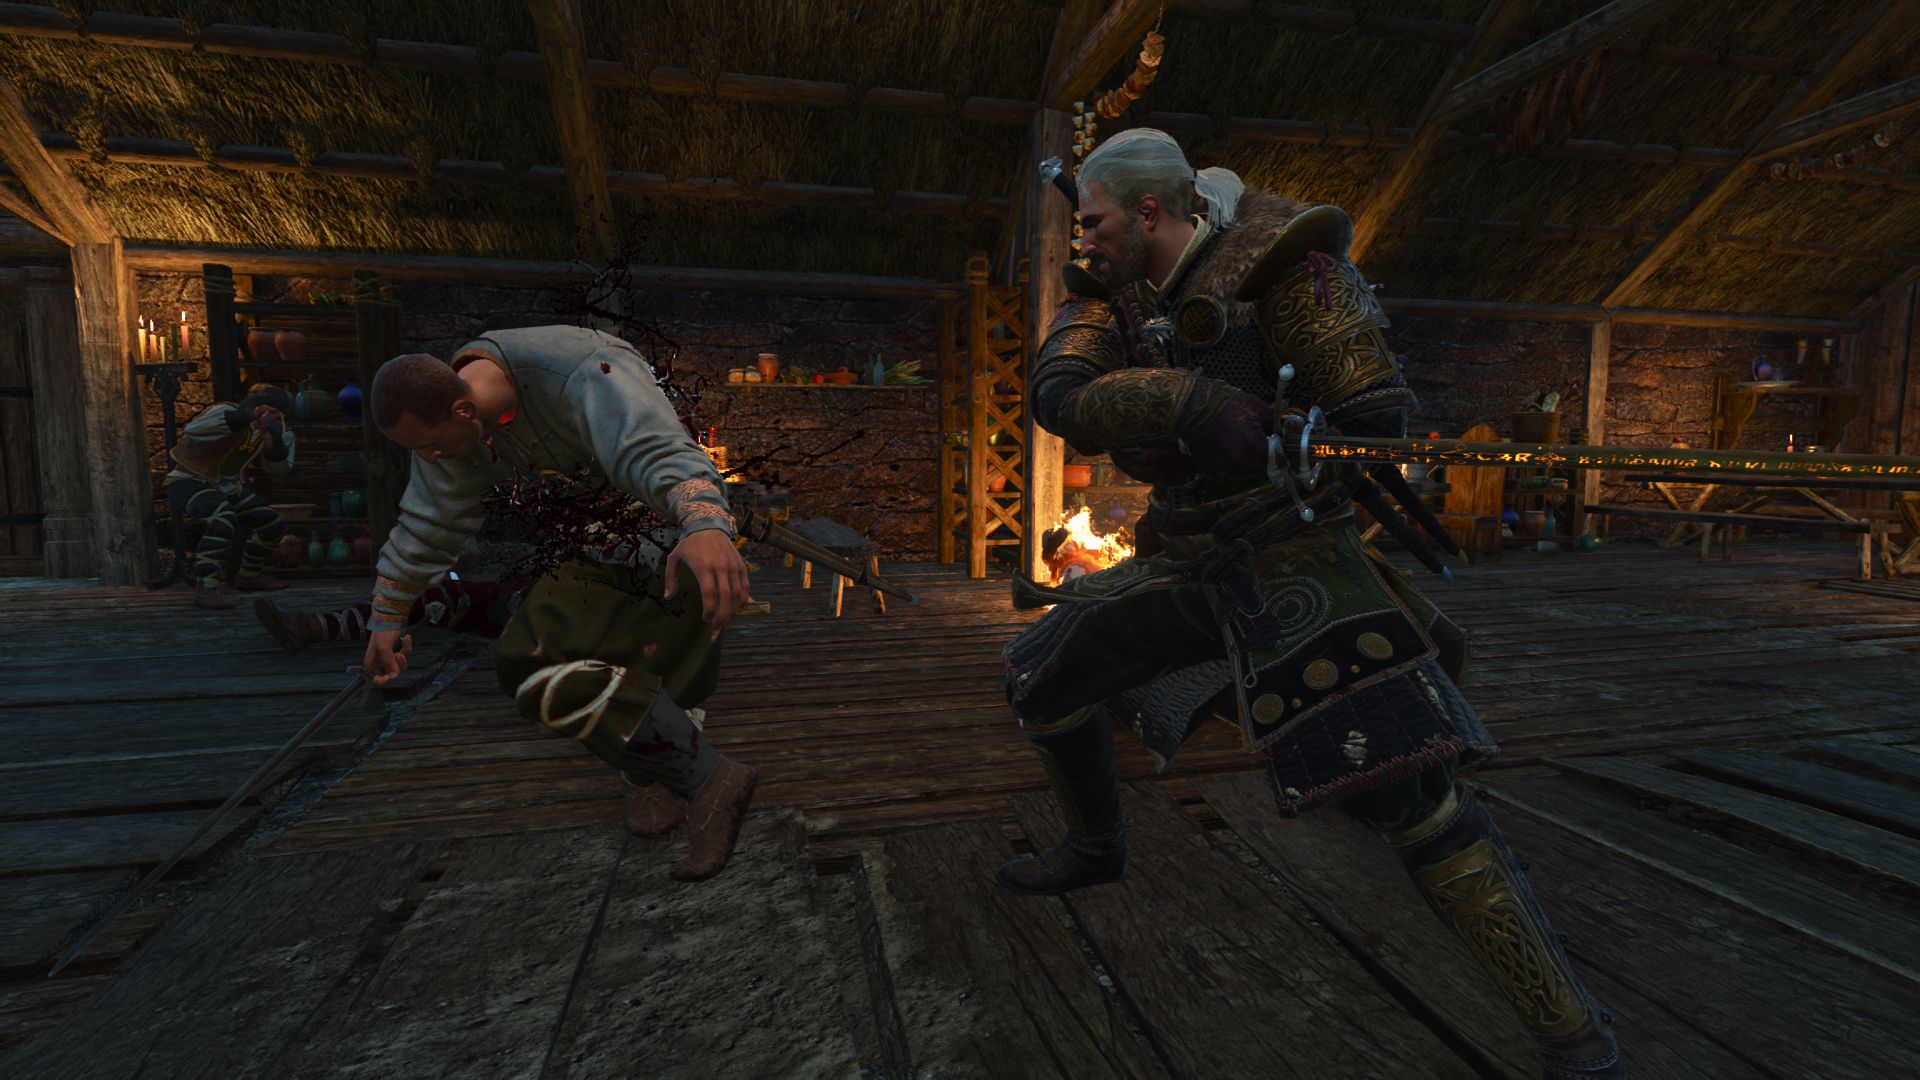 Geralt fights a skelliger thug inside a tavern, cutting him with a sword and sending him reeling.